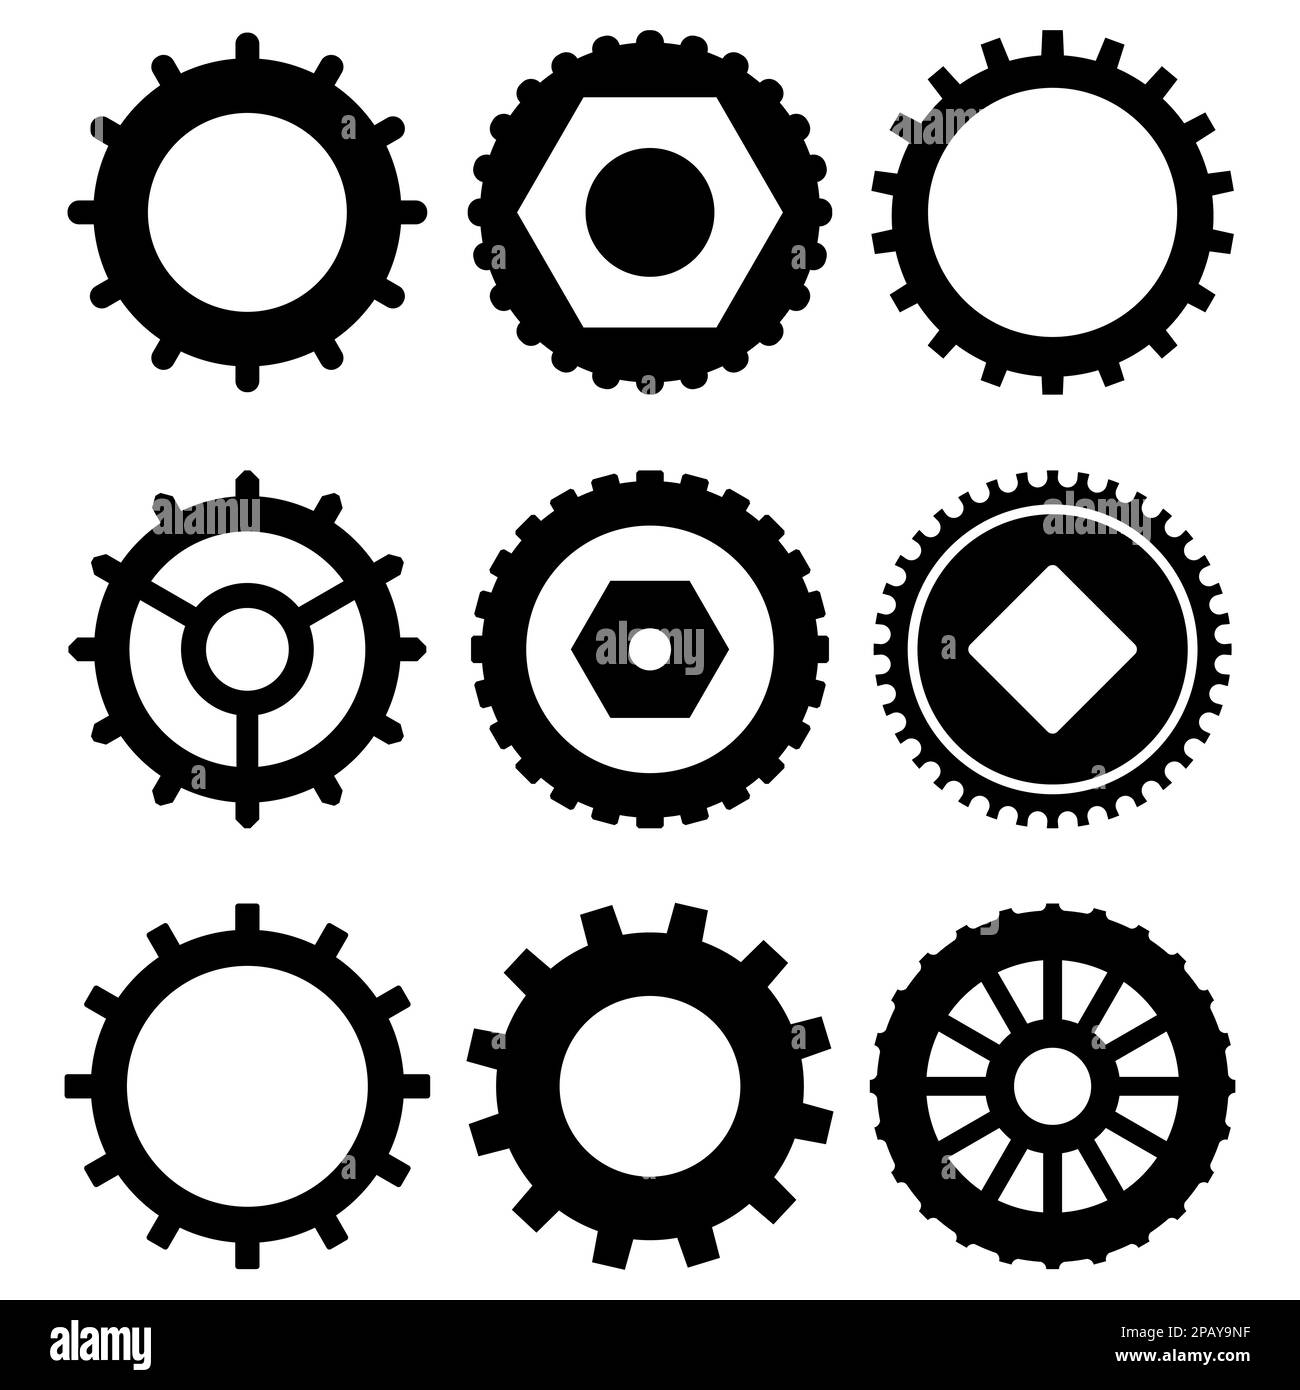 Gear wheels black silhouette collection of cogwheels. Vector industrialization and factory, production of manufacturing machine parts illustration Stock Photo